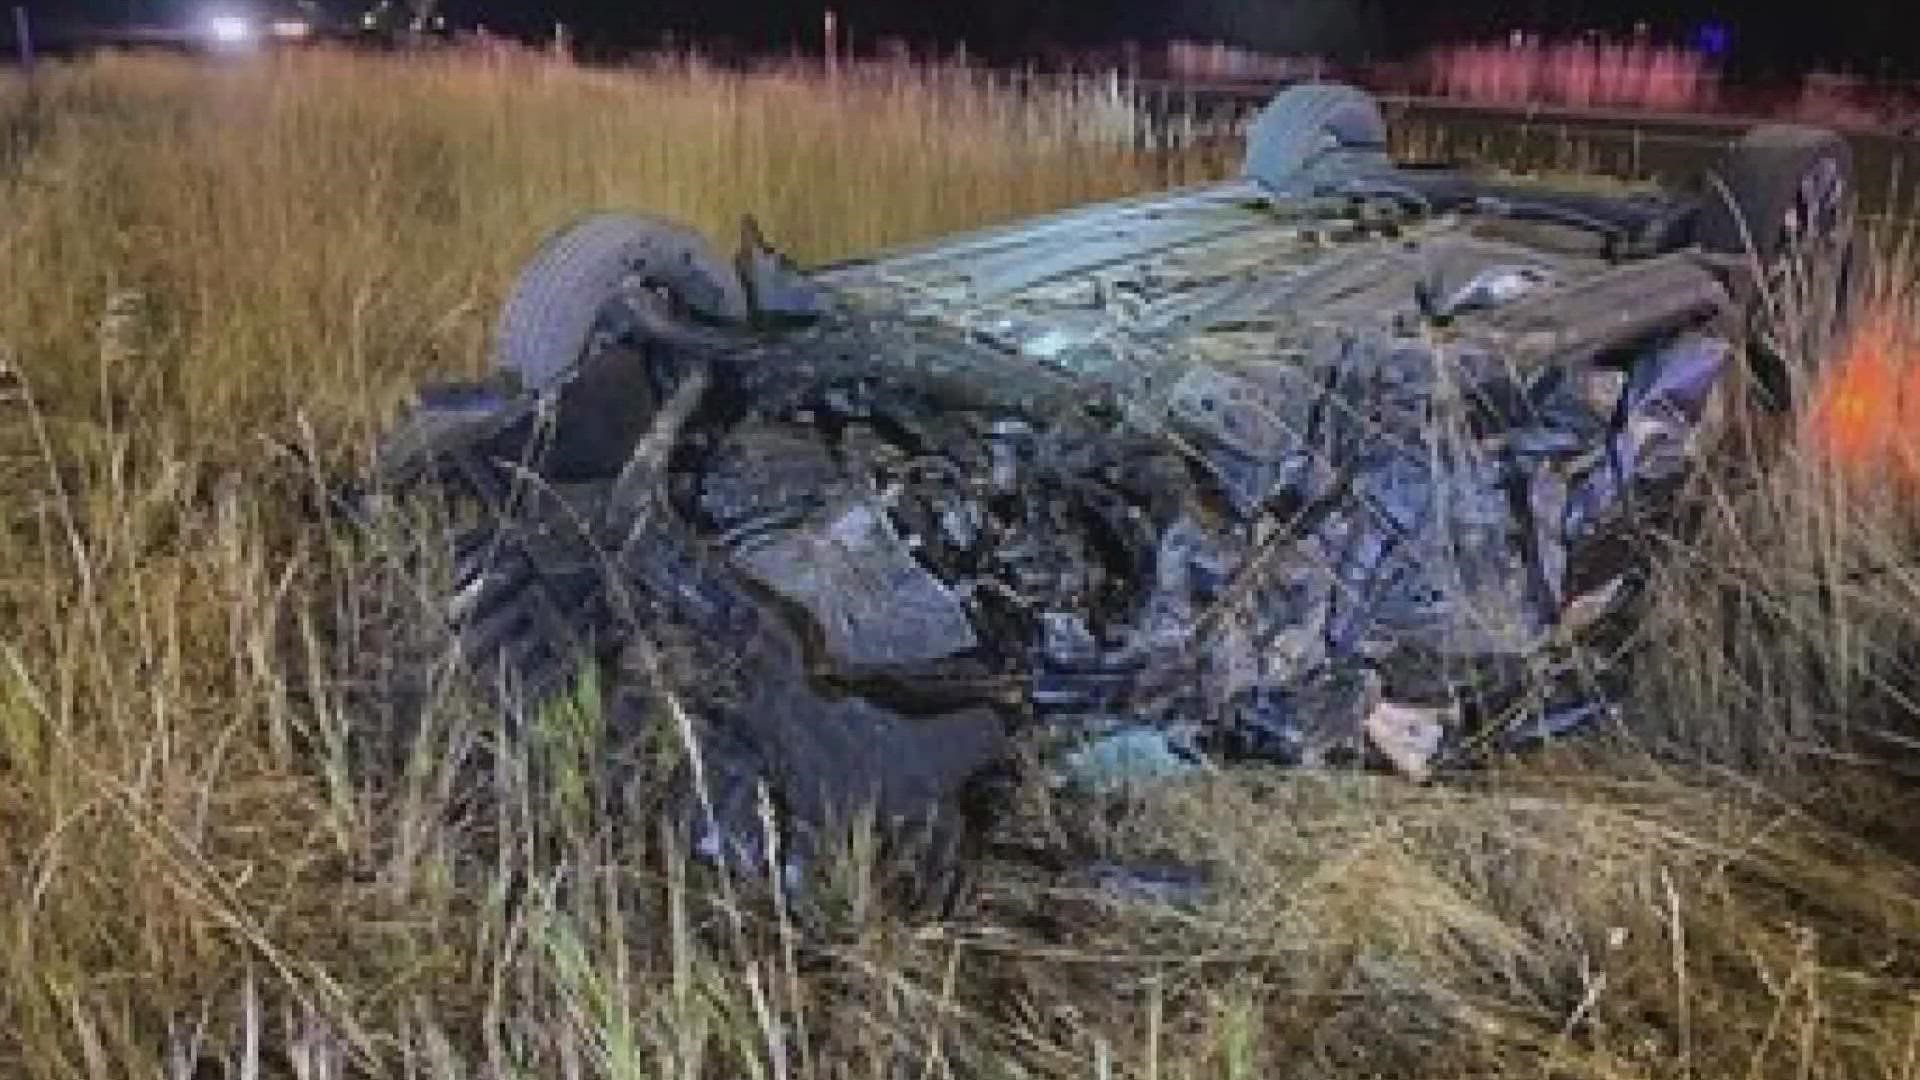 A 13-year-old passenger in the wrong-way car has a broken arm and leg from the crash. The infant and driver in the car that was hit were not injured.